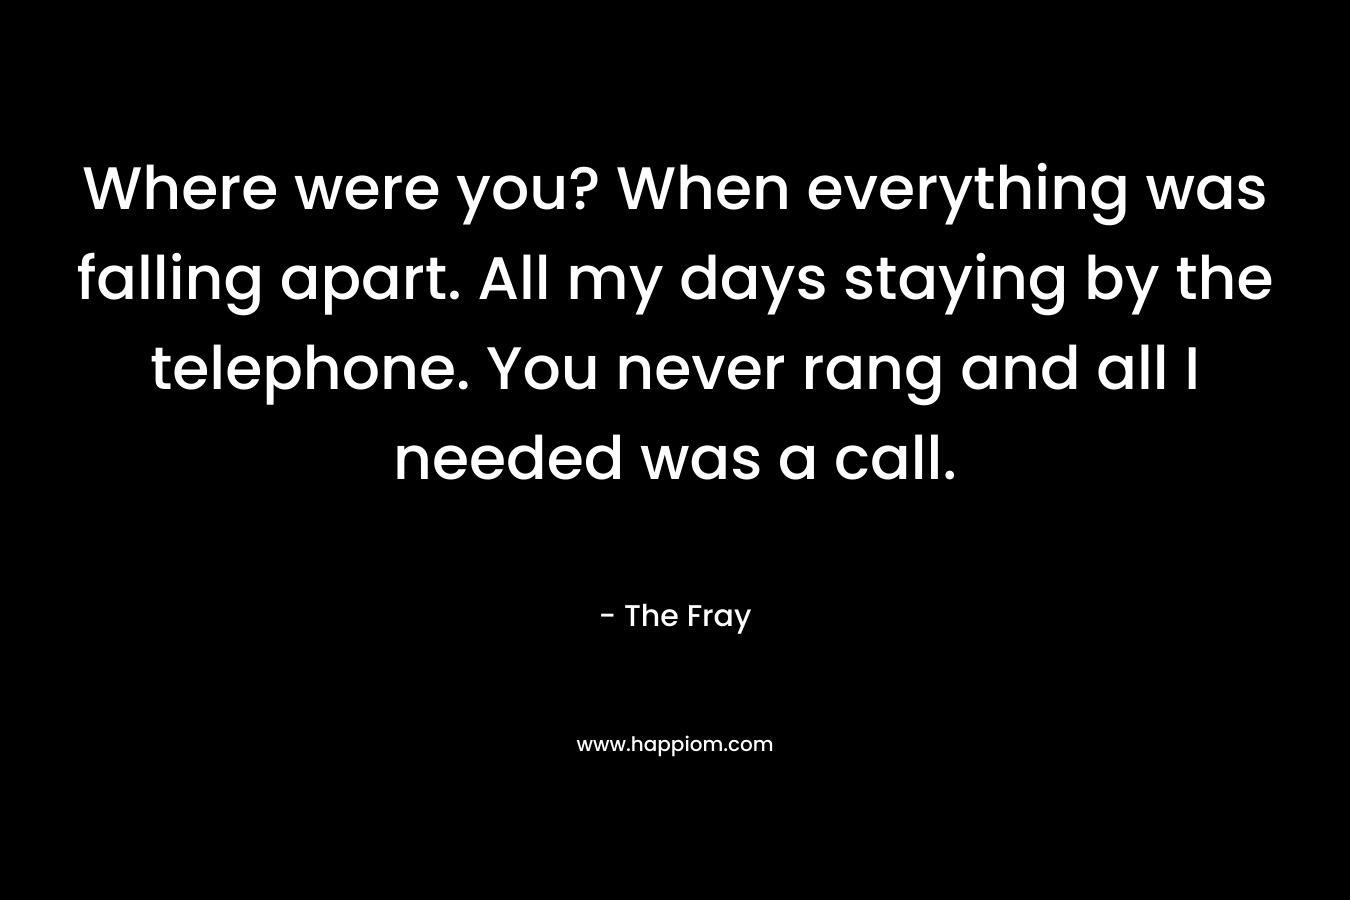 Where were you? When everything was falling apart. All my days staying by the telephone. You never rang and all I needed was a call. – The Fray